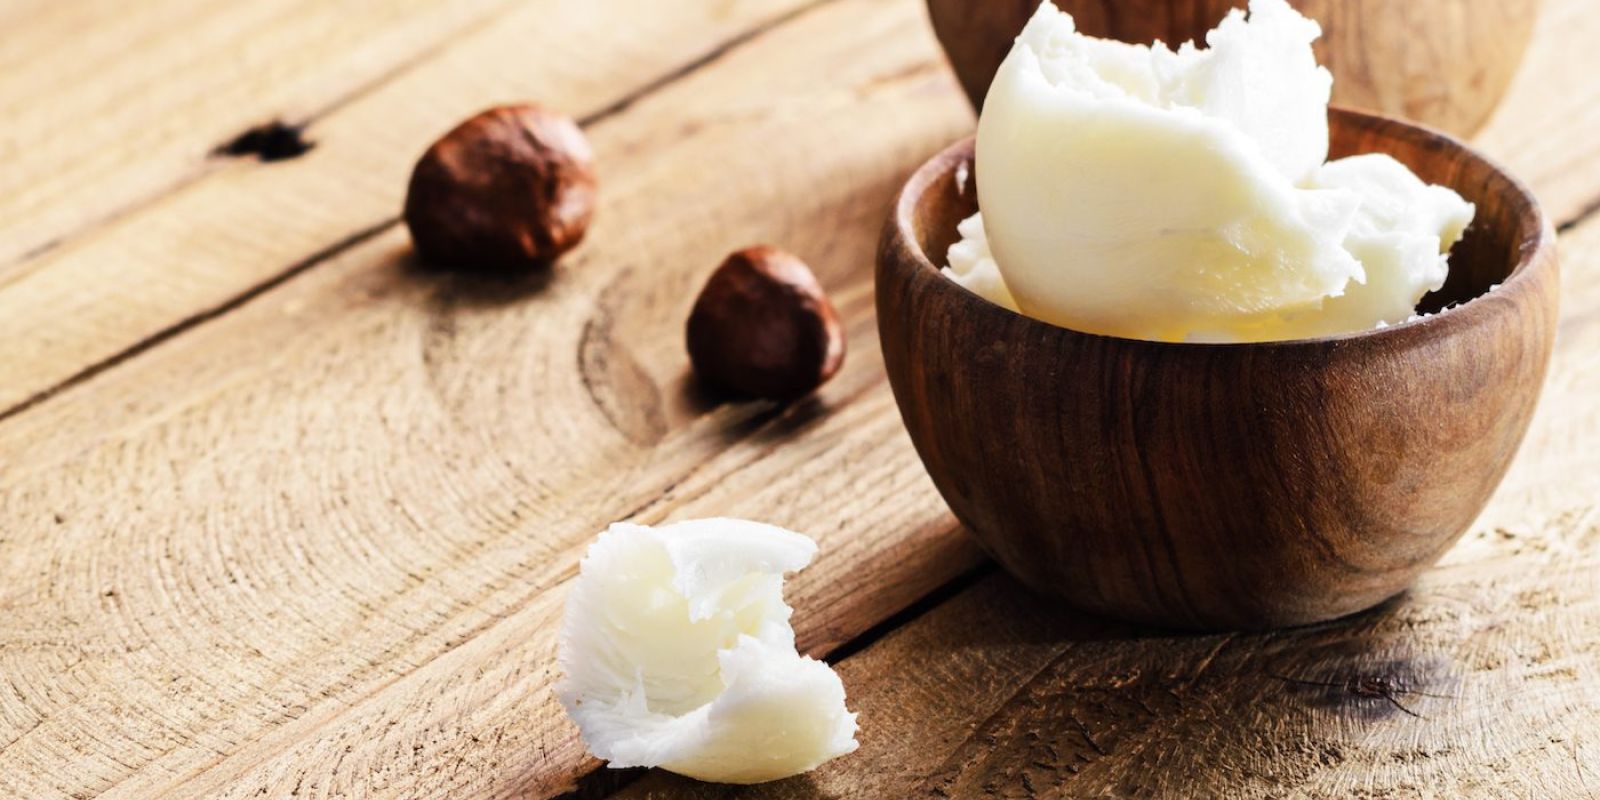 4 Uses Of Shea Butter - Your Best Friend During Winters admin ajax.php?action=kernel&p=image&src=%7B%22file%22%3A%22wp content%2Fuploads%2F2020%2F12%2Fpurcorganics shea butters